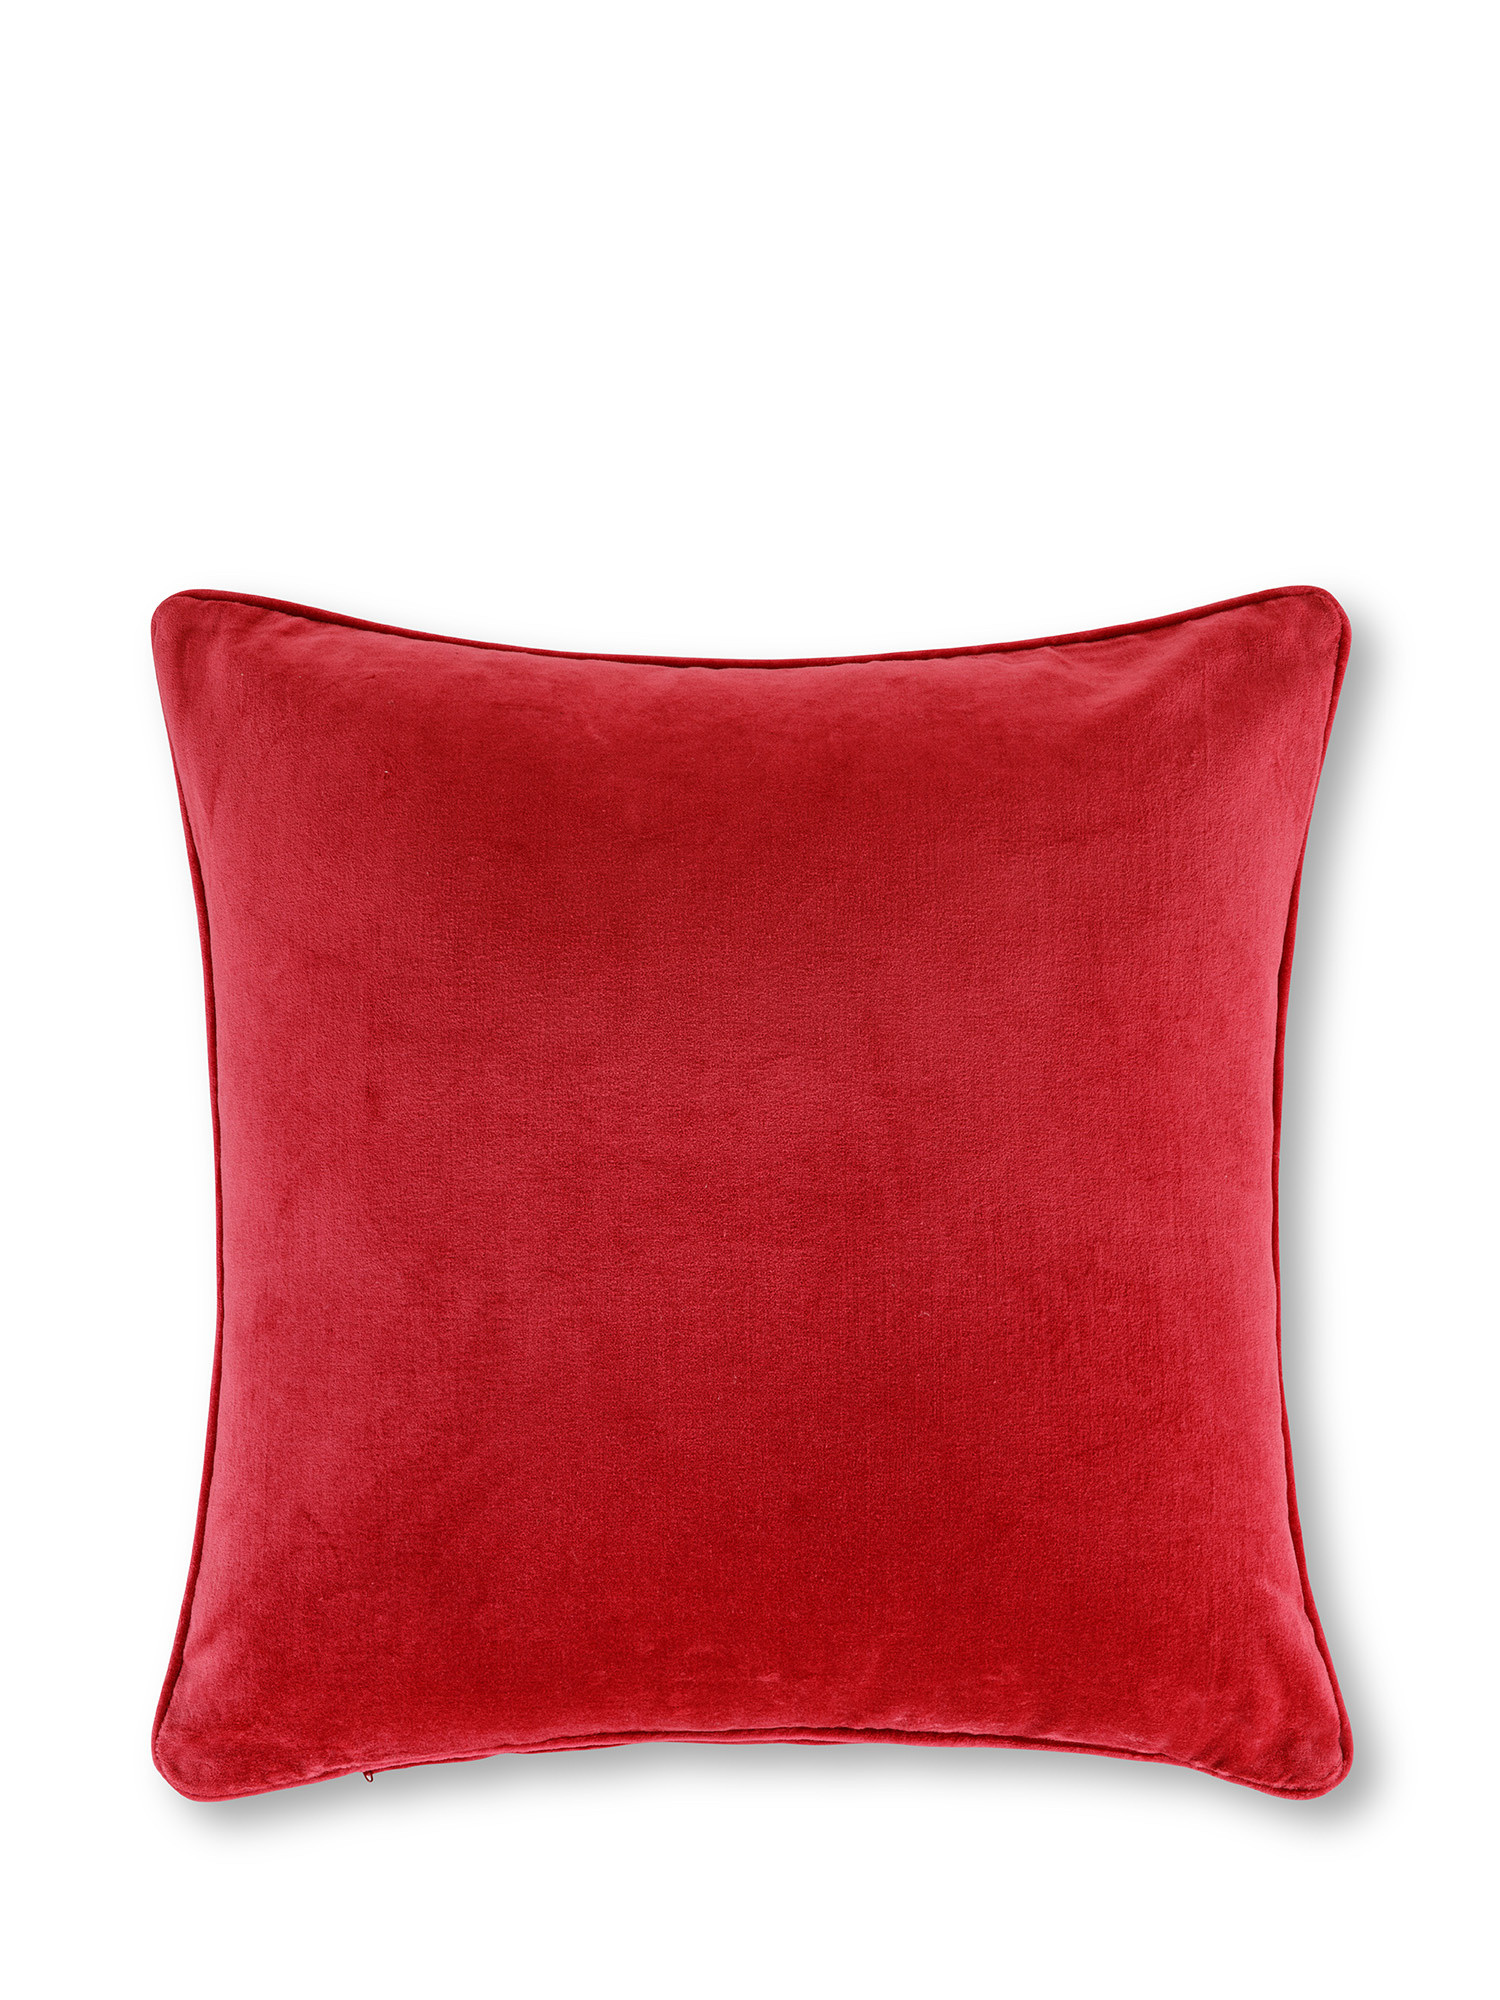 Velvet cushion with piping 45x45 cm, Red, large image number 0